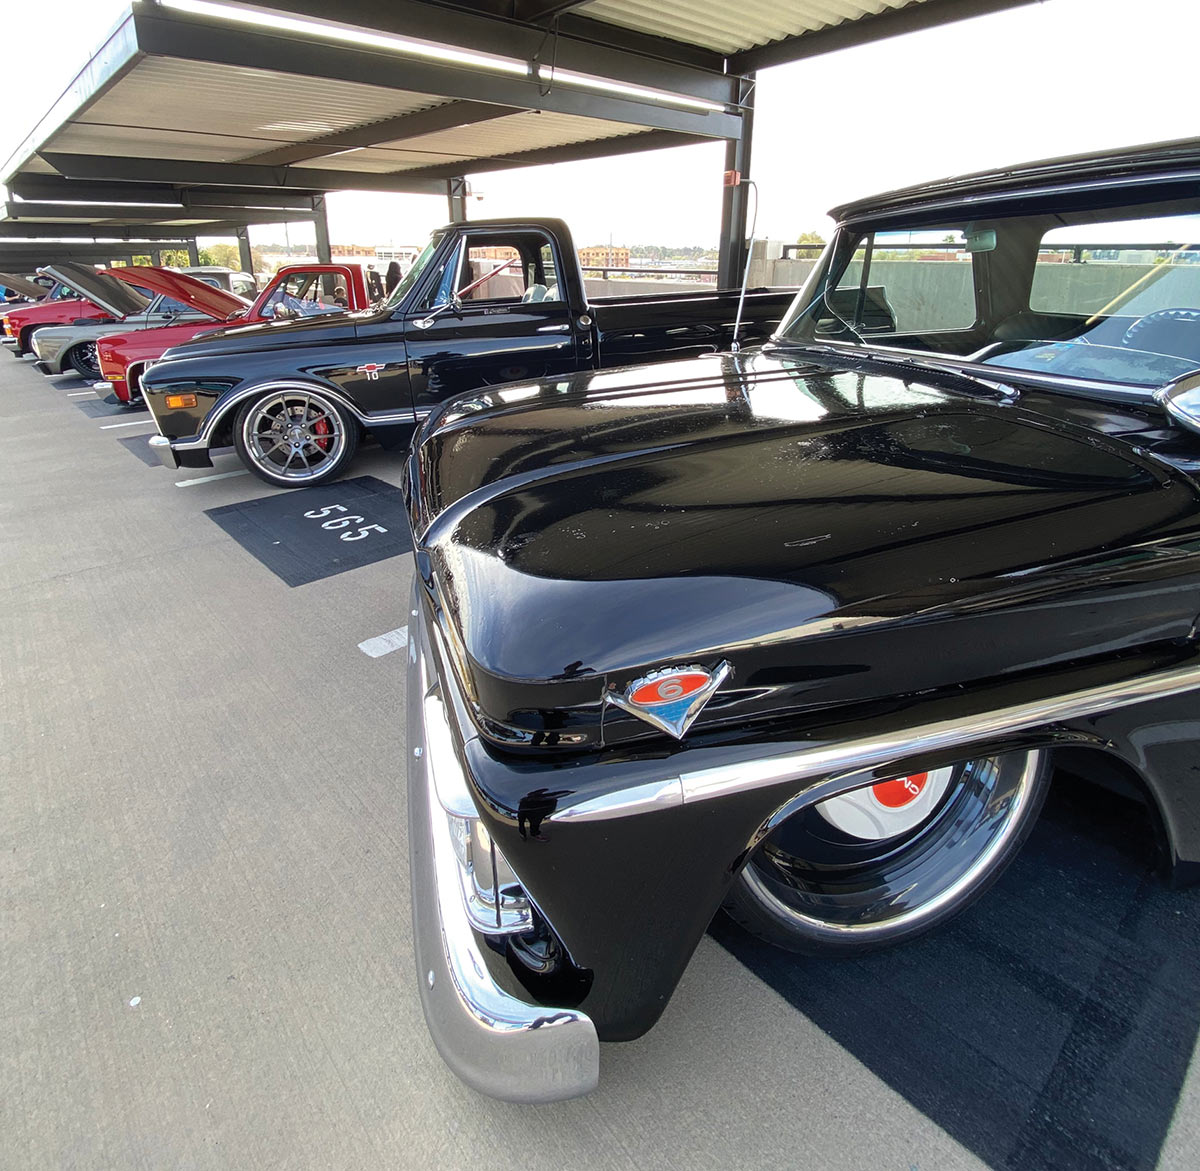 Row of C10's at show